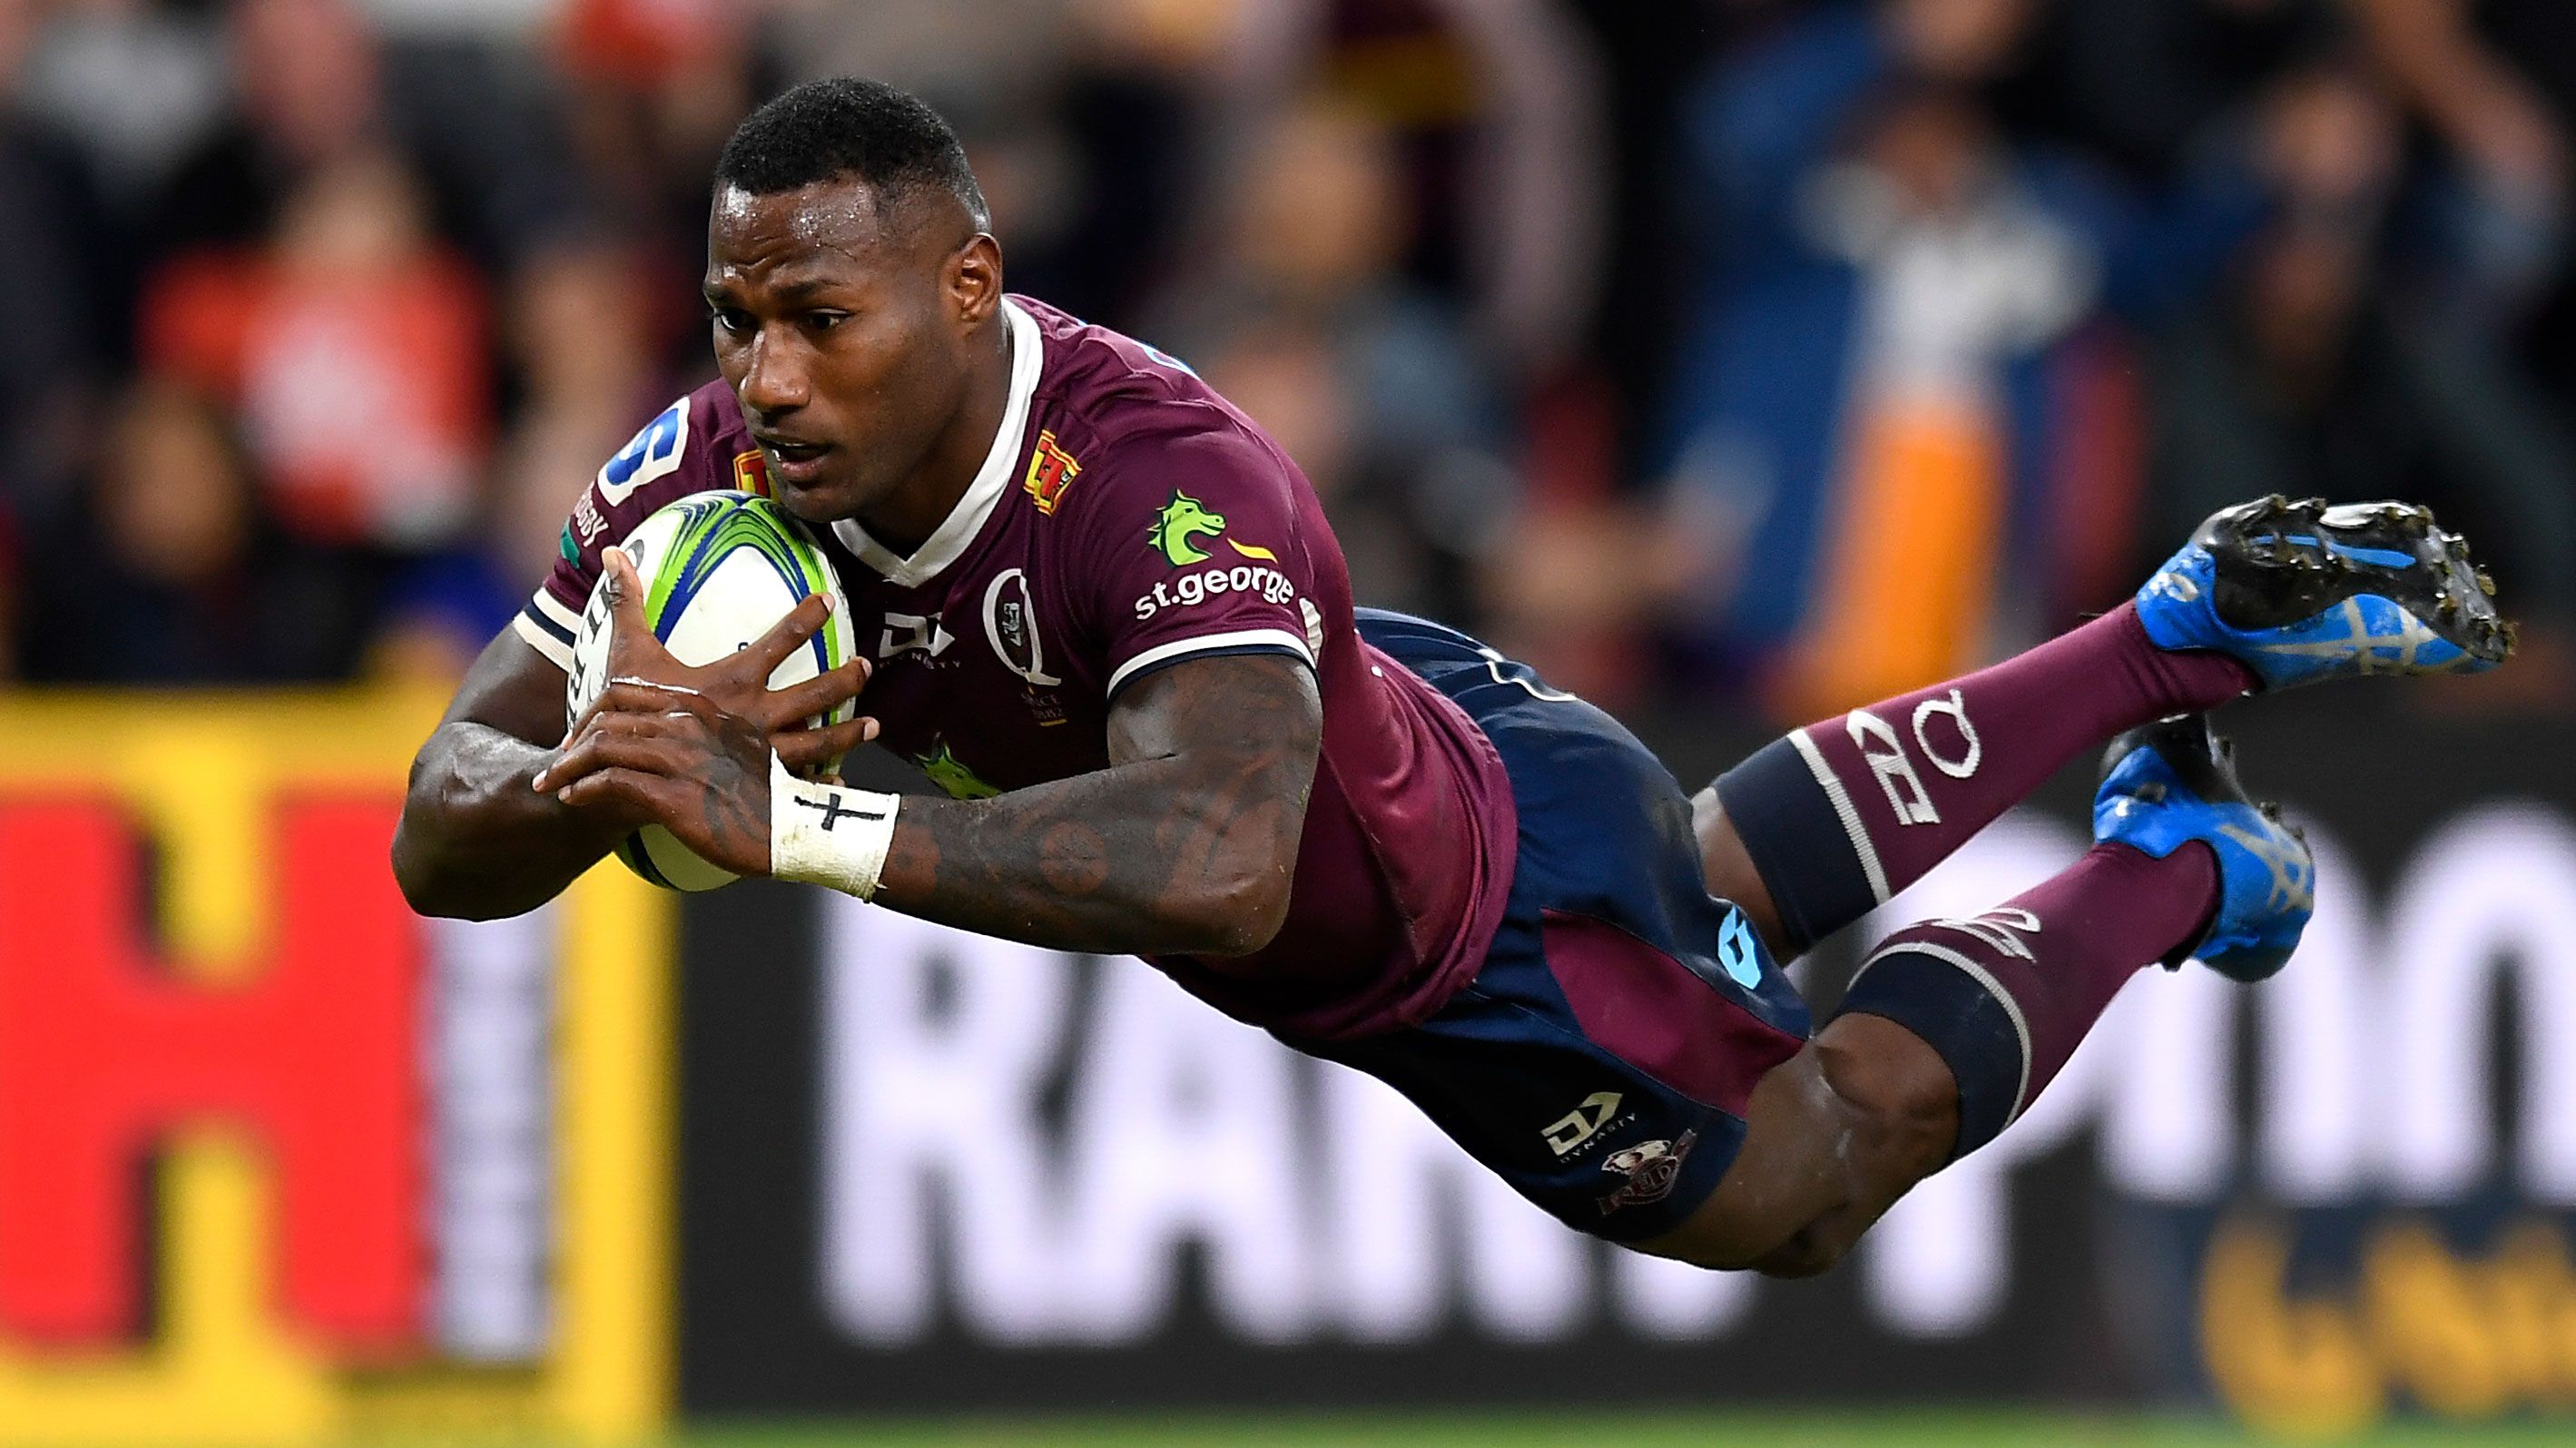 Suliasi Vunivalu for the Queensland Reds against the Crusaders at Suncorp Stadium last year.